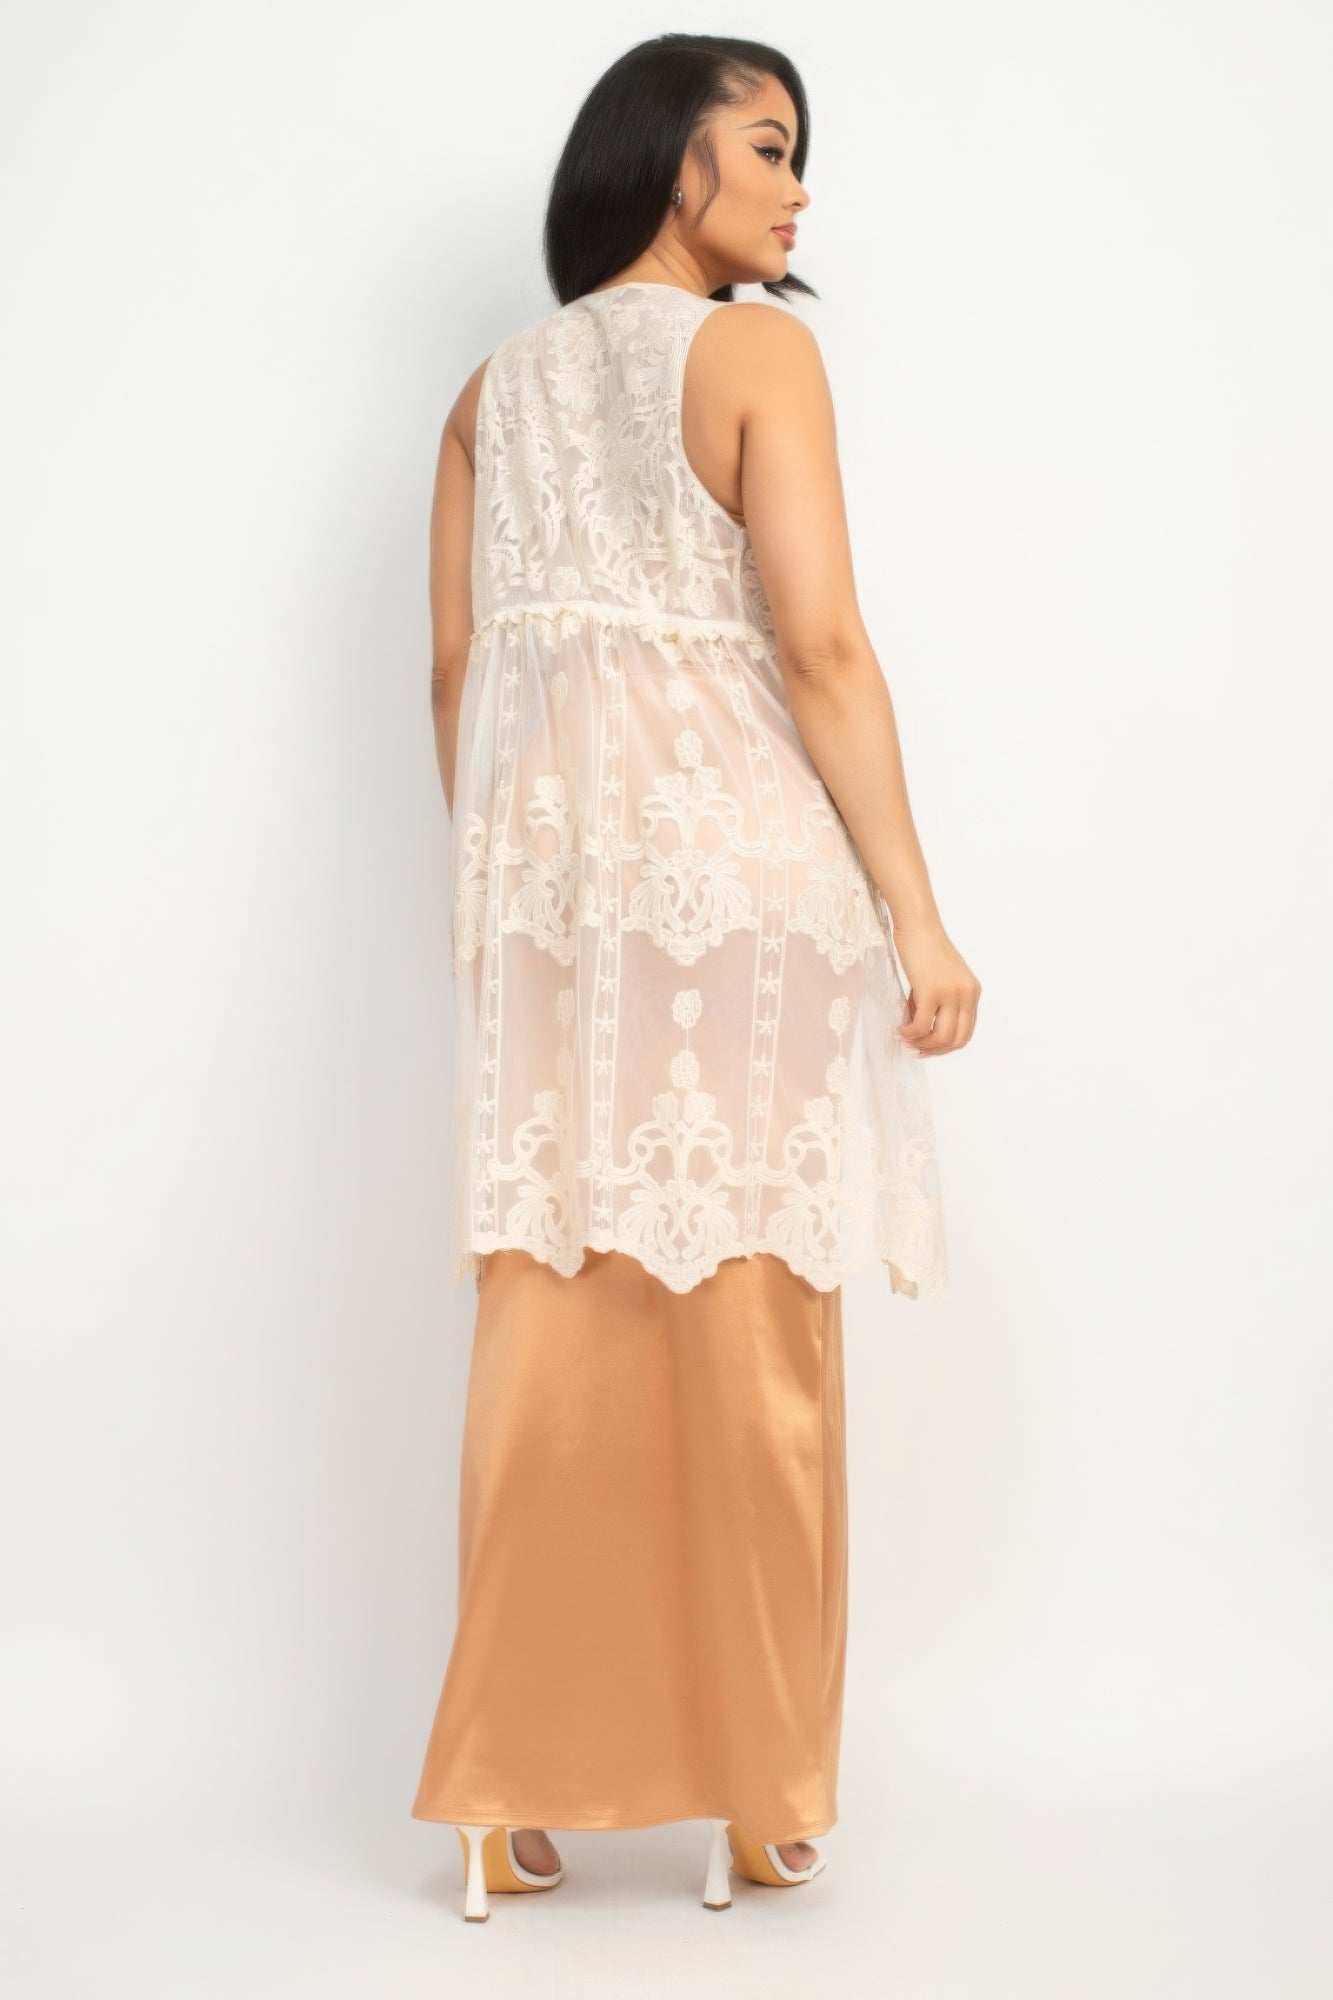 Sheer Embroidered Lace Vest - Tigbuls Variety Fashion